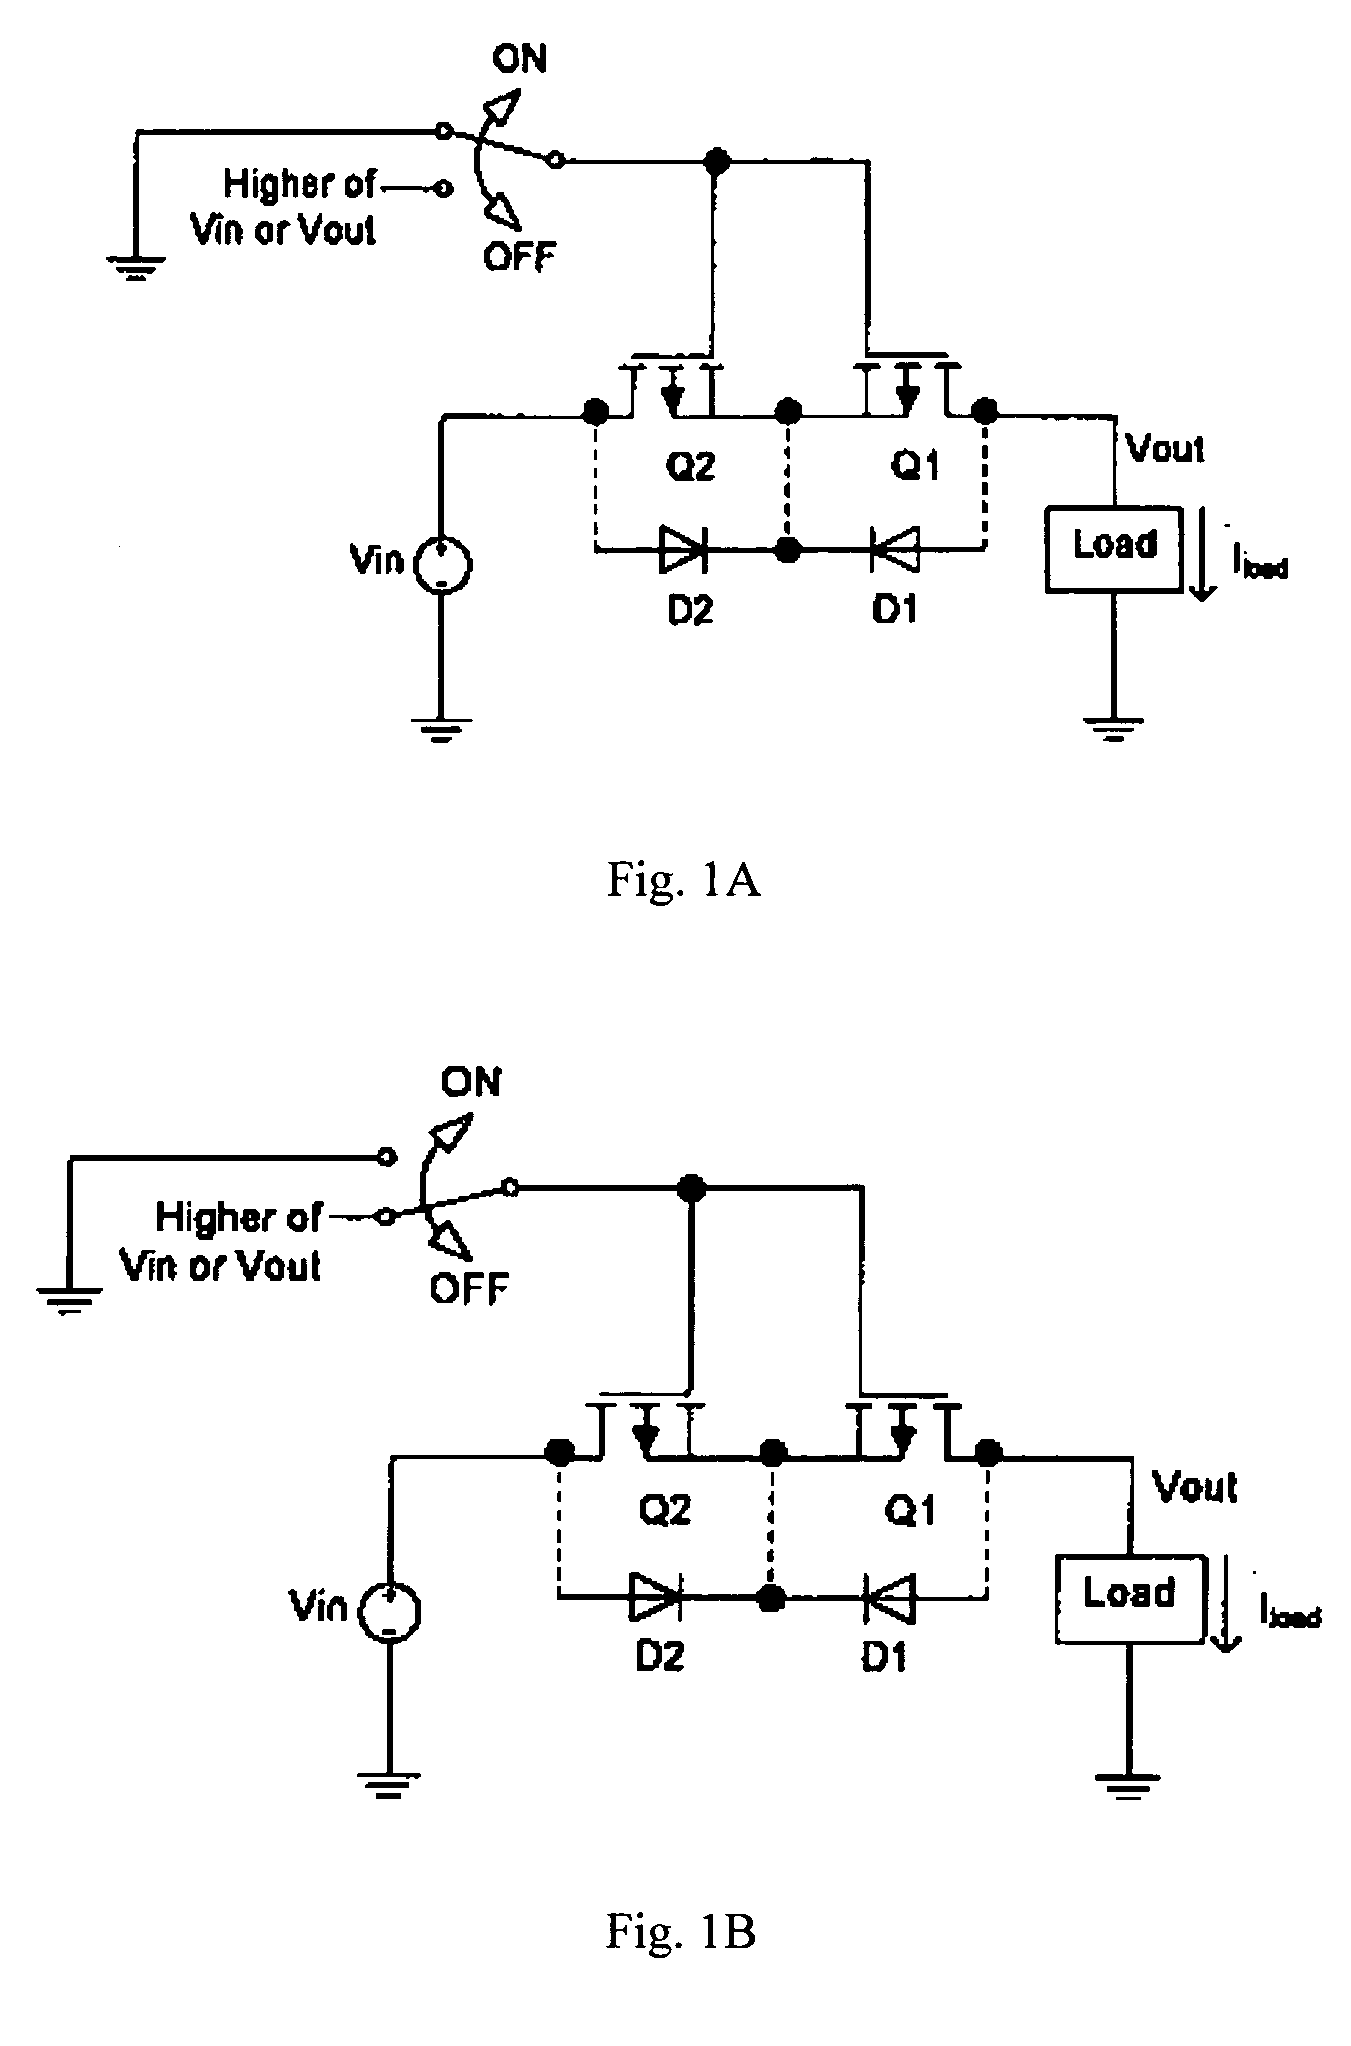 Current limited bilateral MOSFET switch with reduced switch resistance and lower manufacturing cost